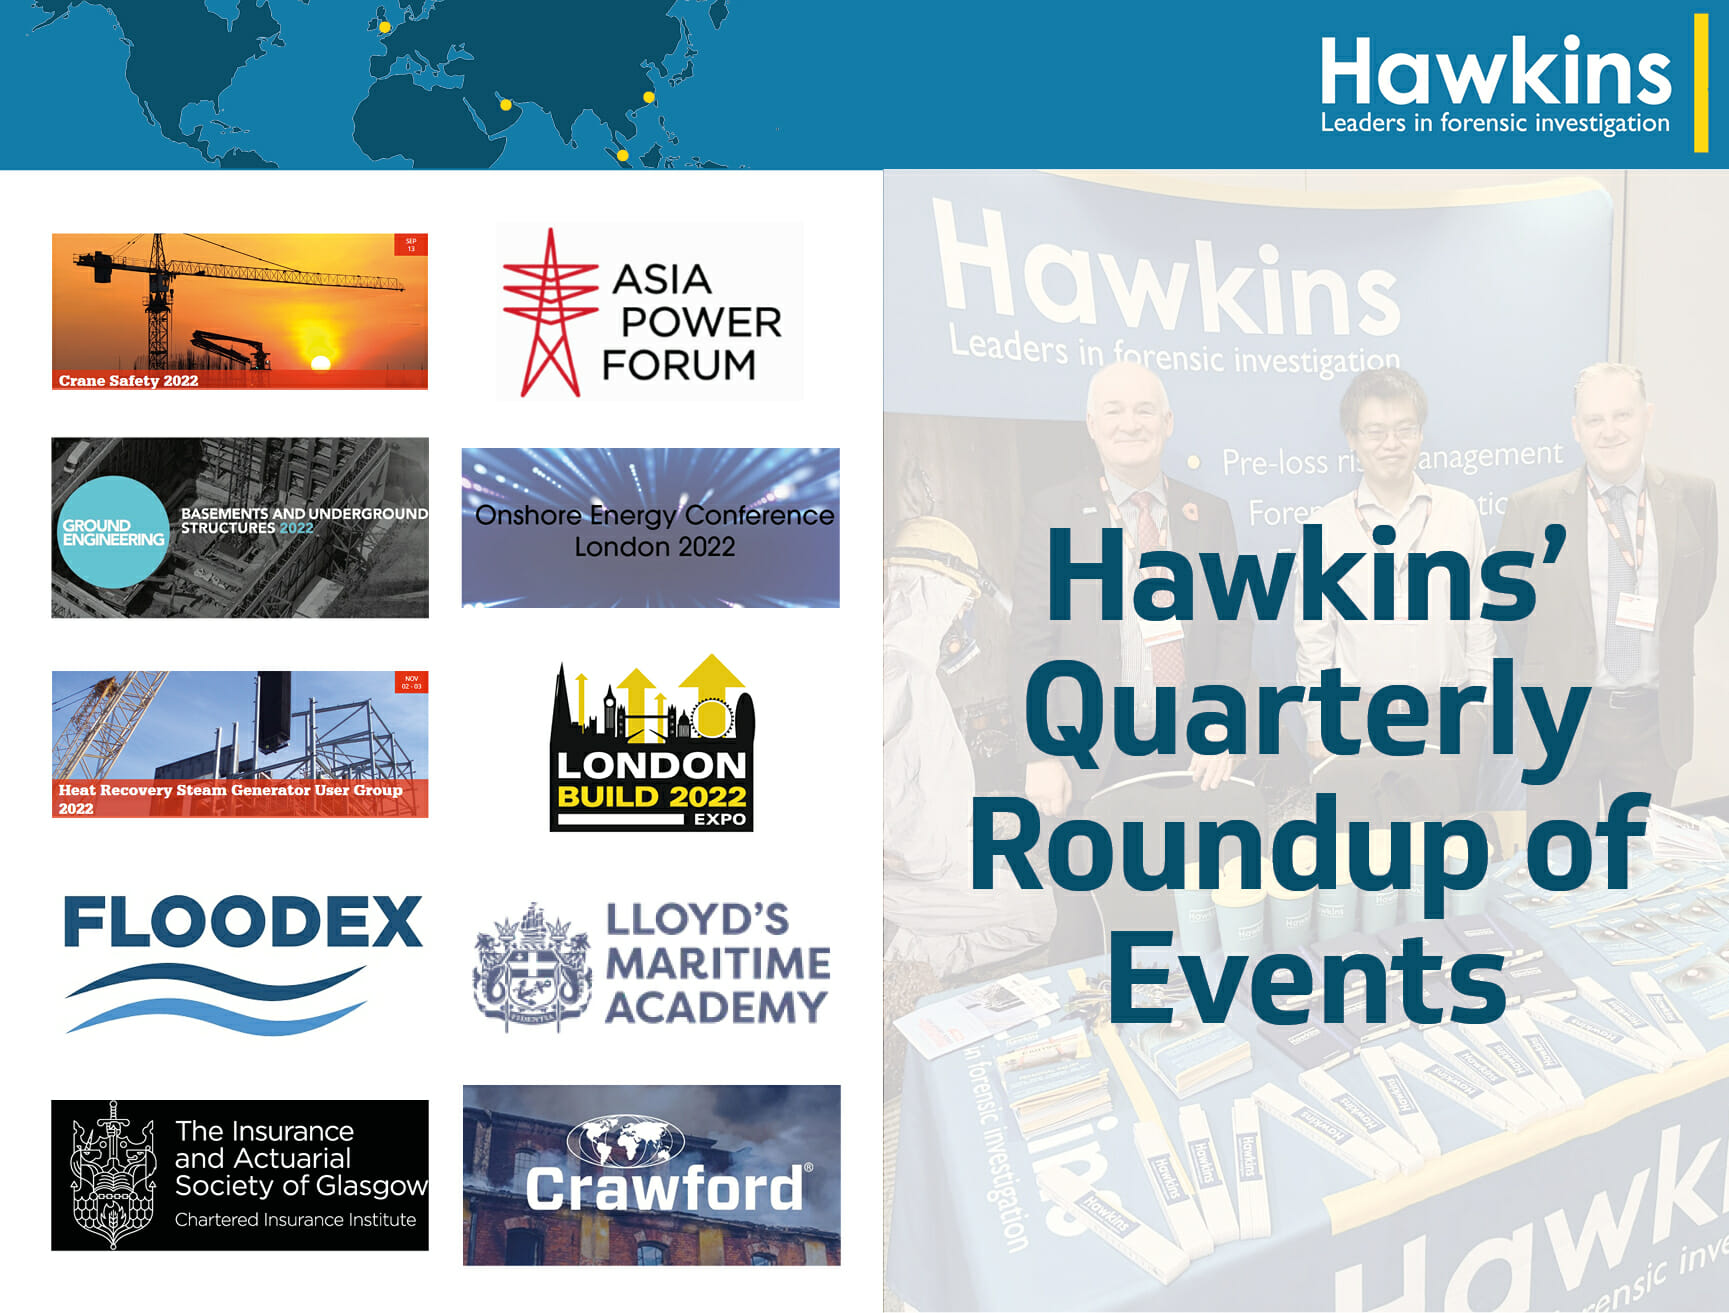 Hawkins' Quarterly Roundup of Events